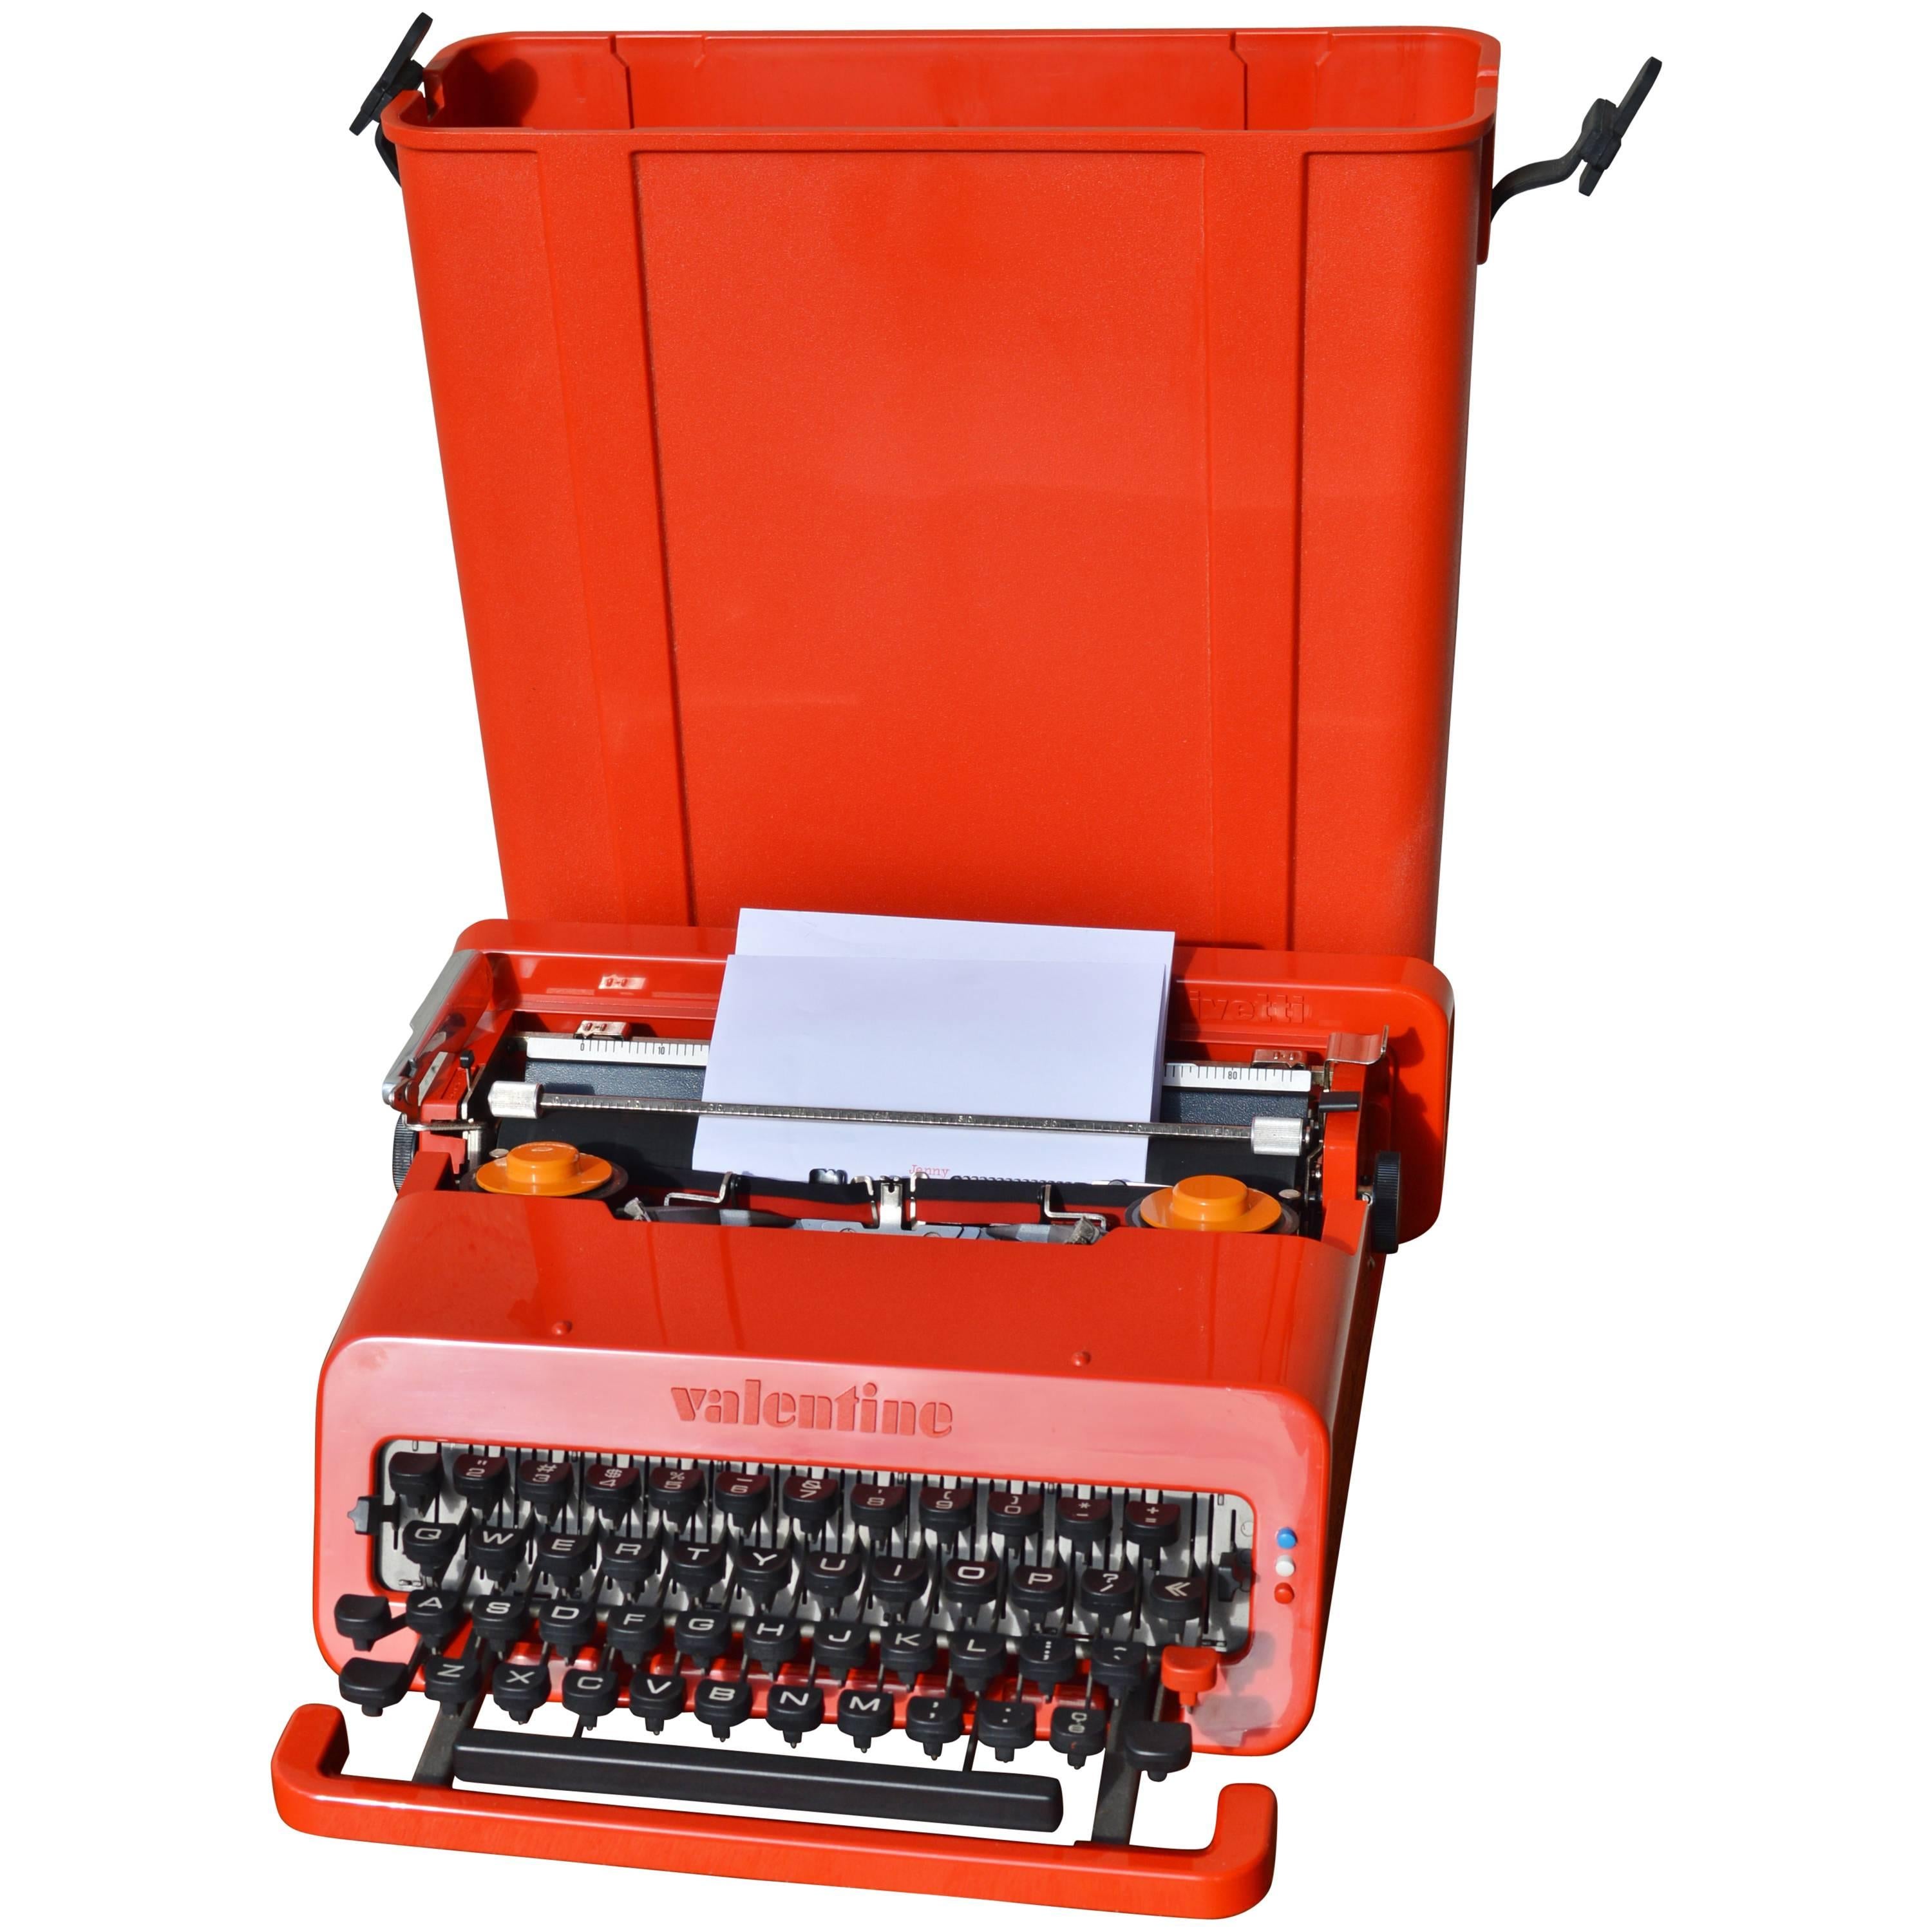 Red Olivetti "Valentine" Typewriter and Case by Ettore Sottsass